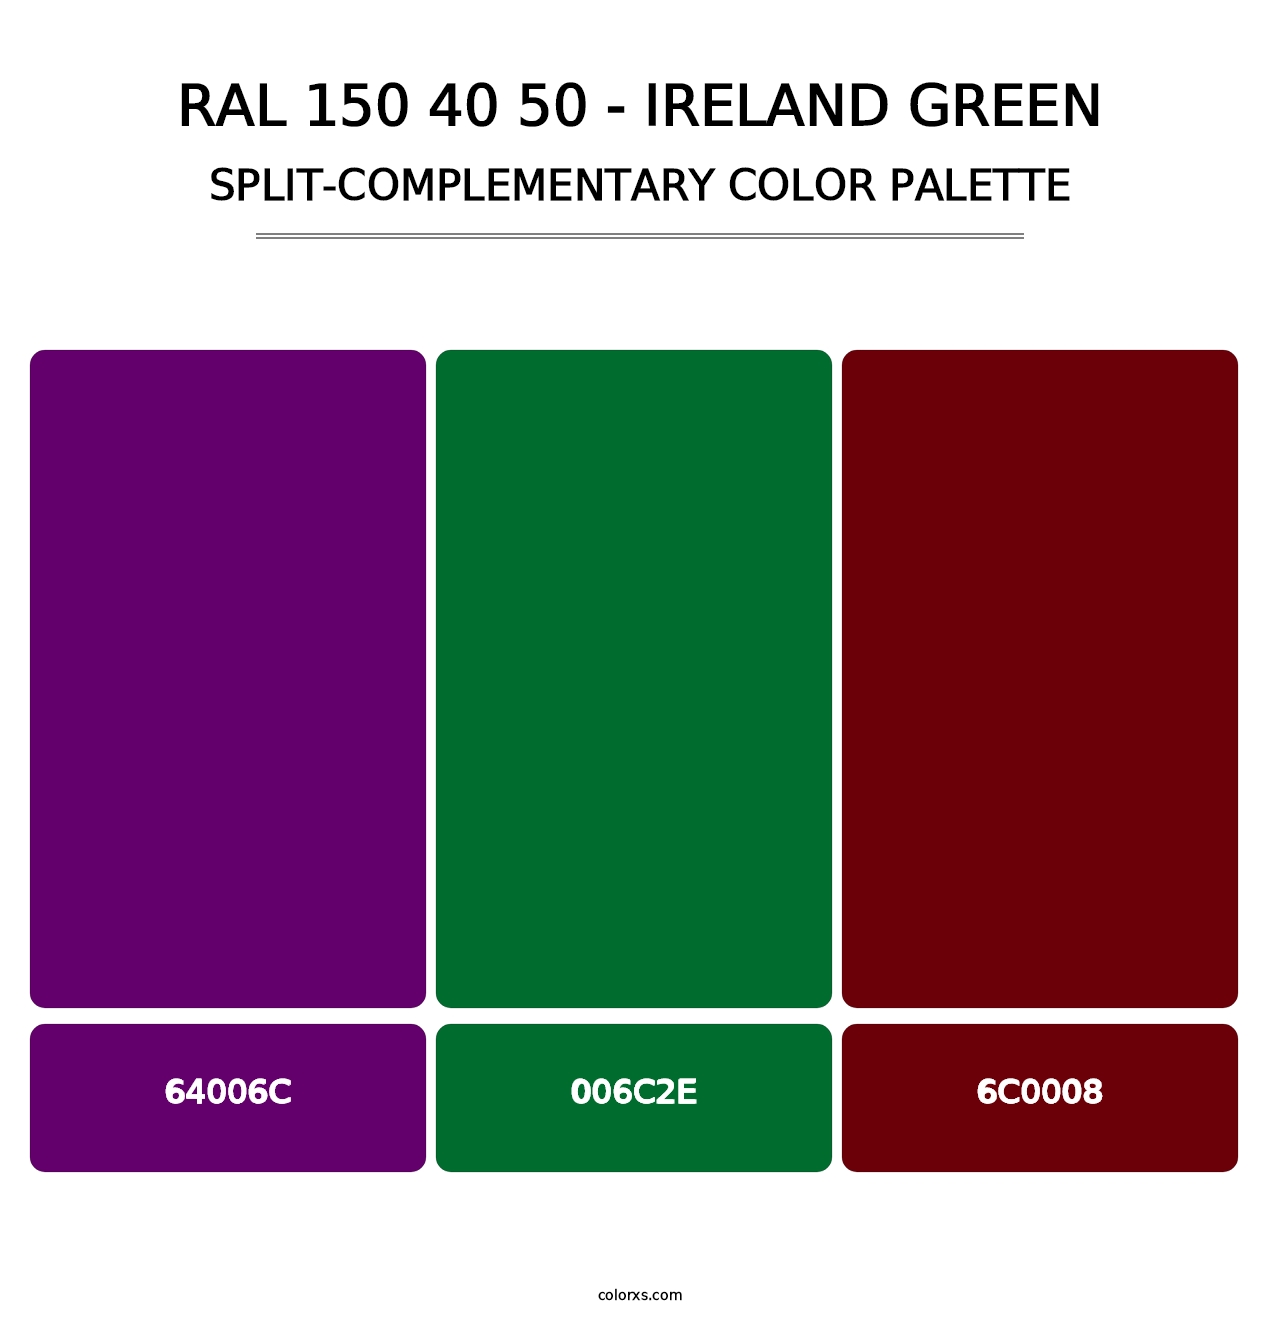 RAL 150 40 50 - Ireland Green - Split-Complementary Color Palette